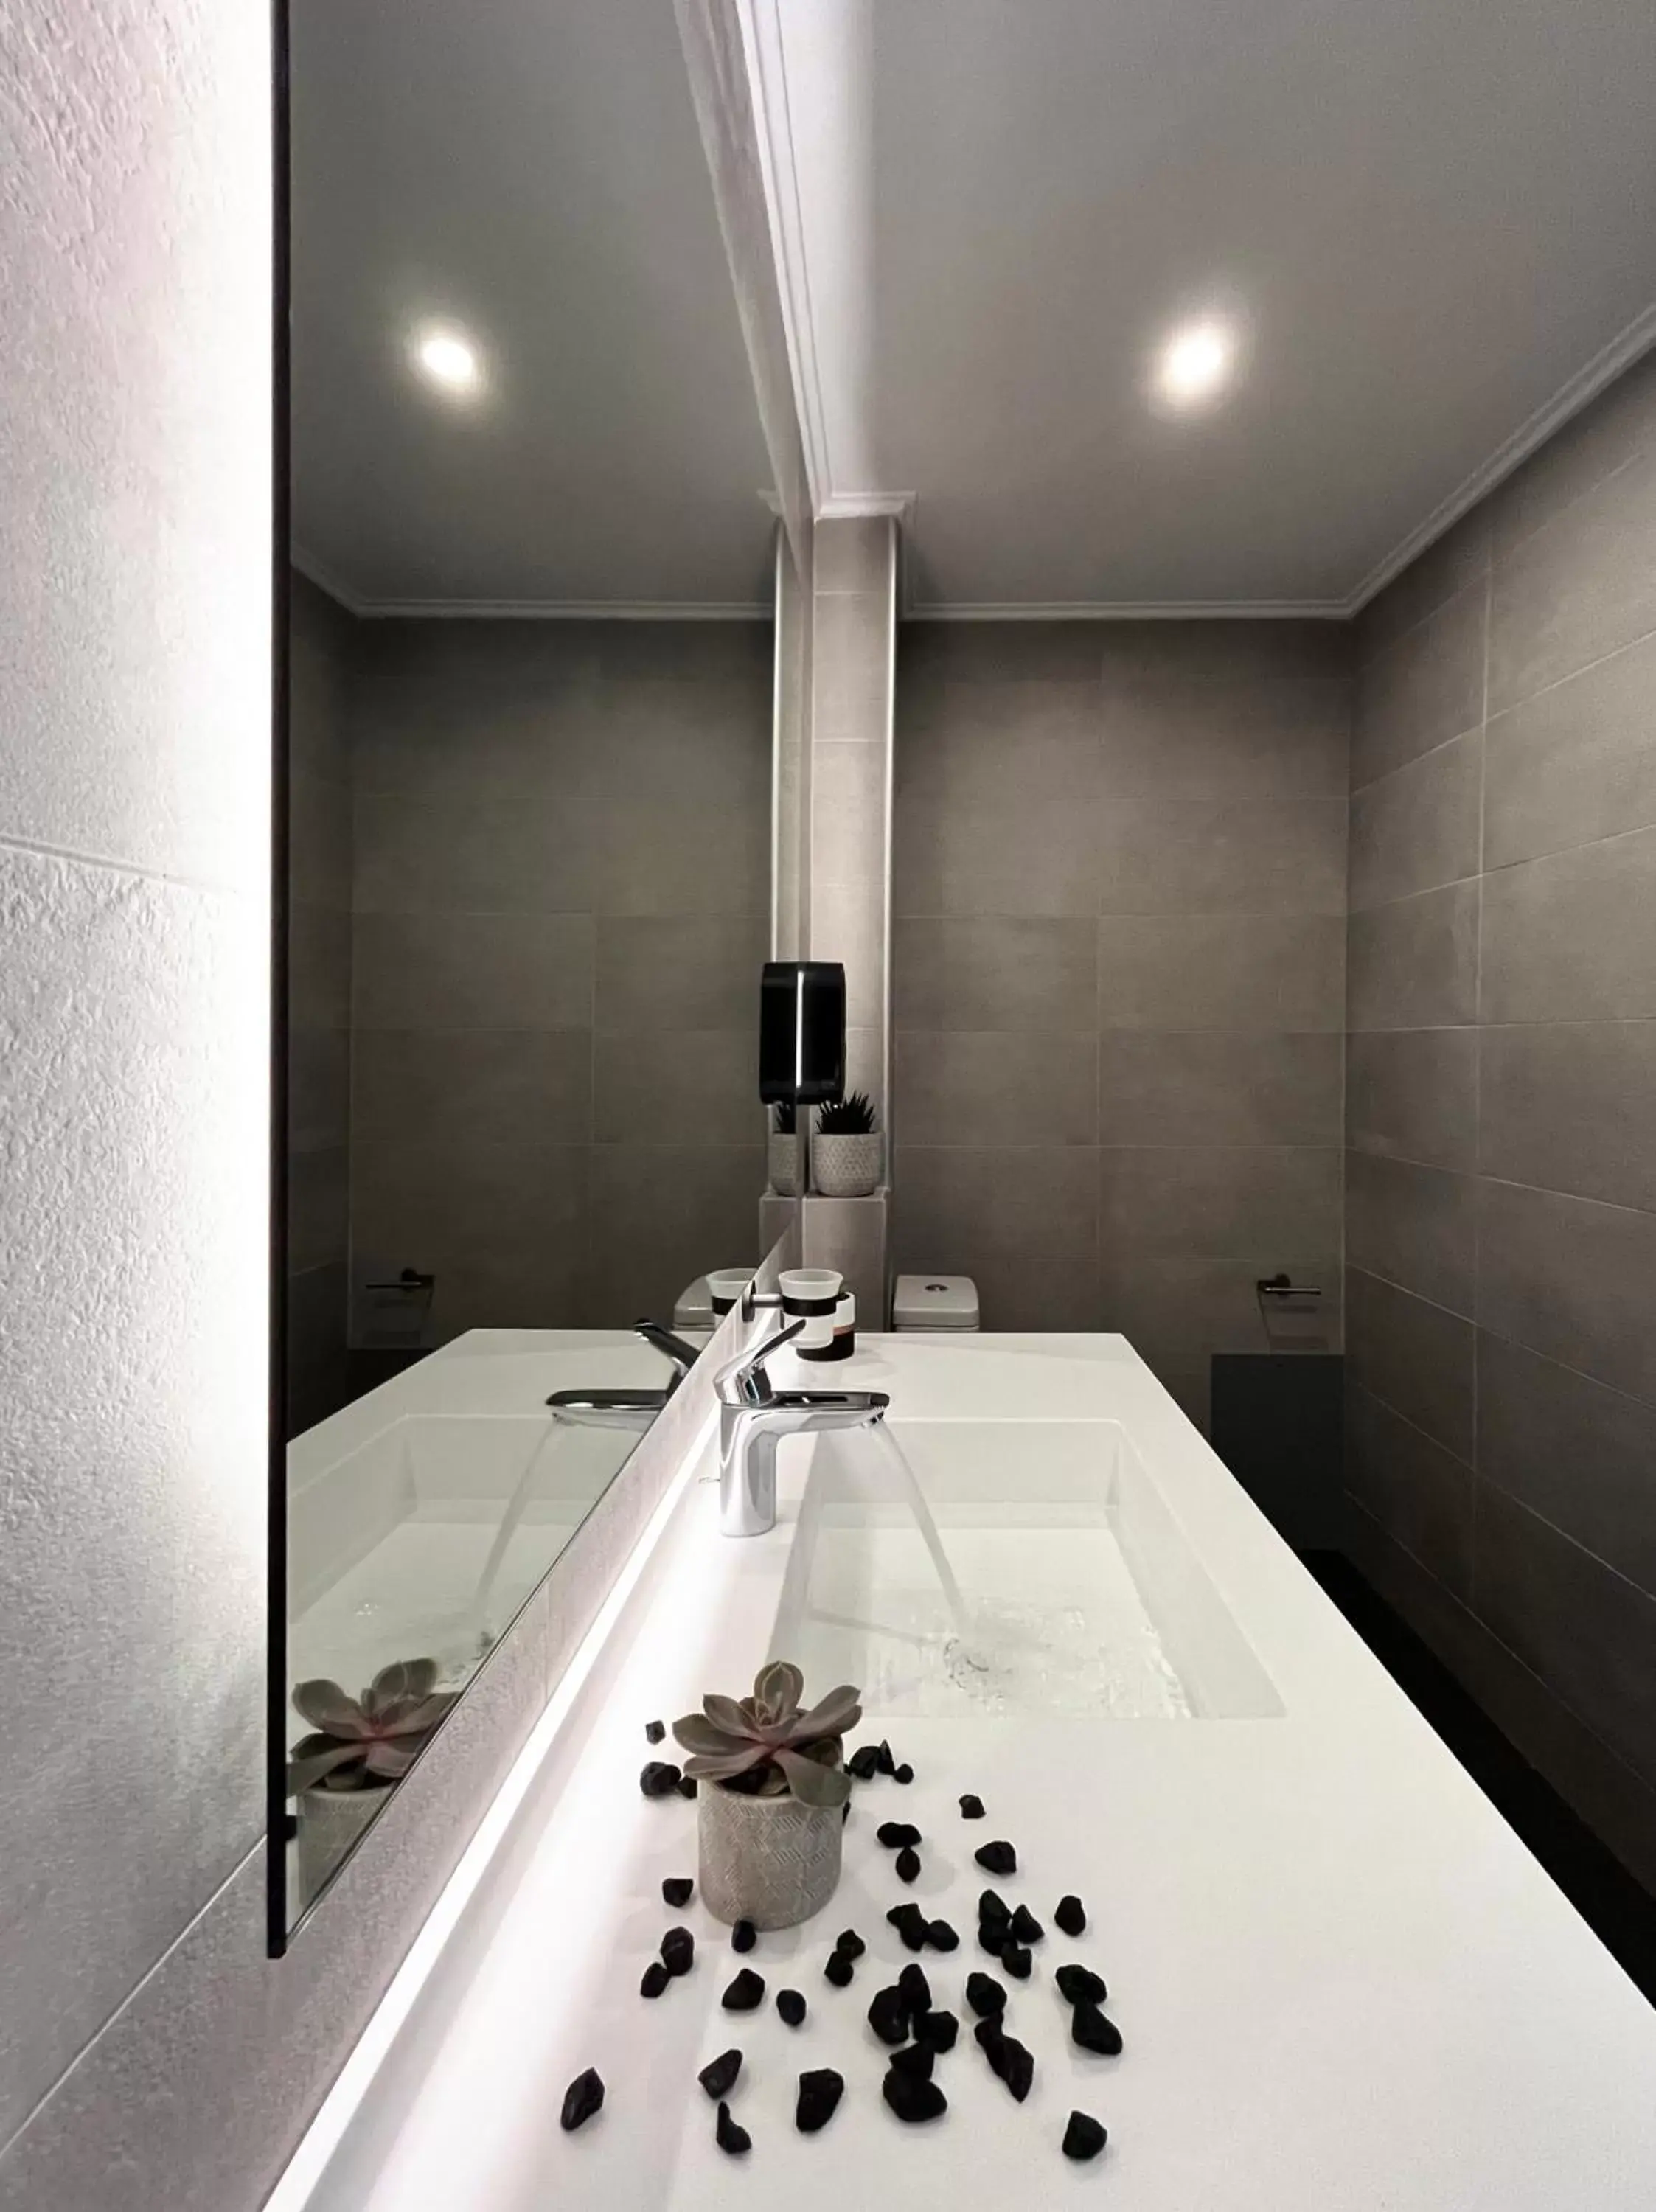 Bathroom in Exarchia House Project